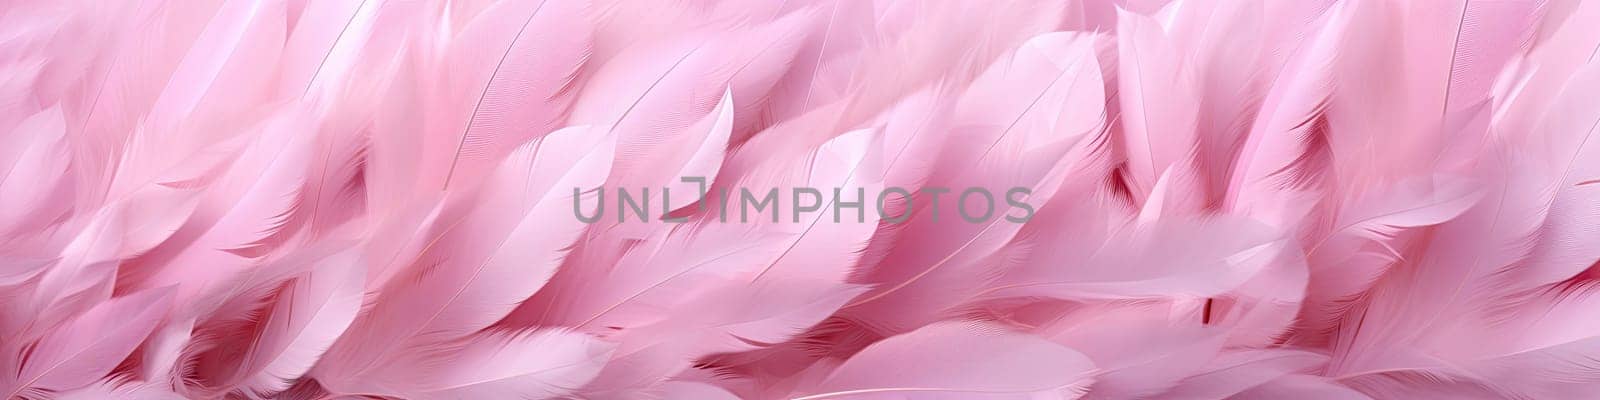 Banner of an abstract light pink feathers as background texture by Kadula